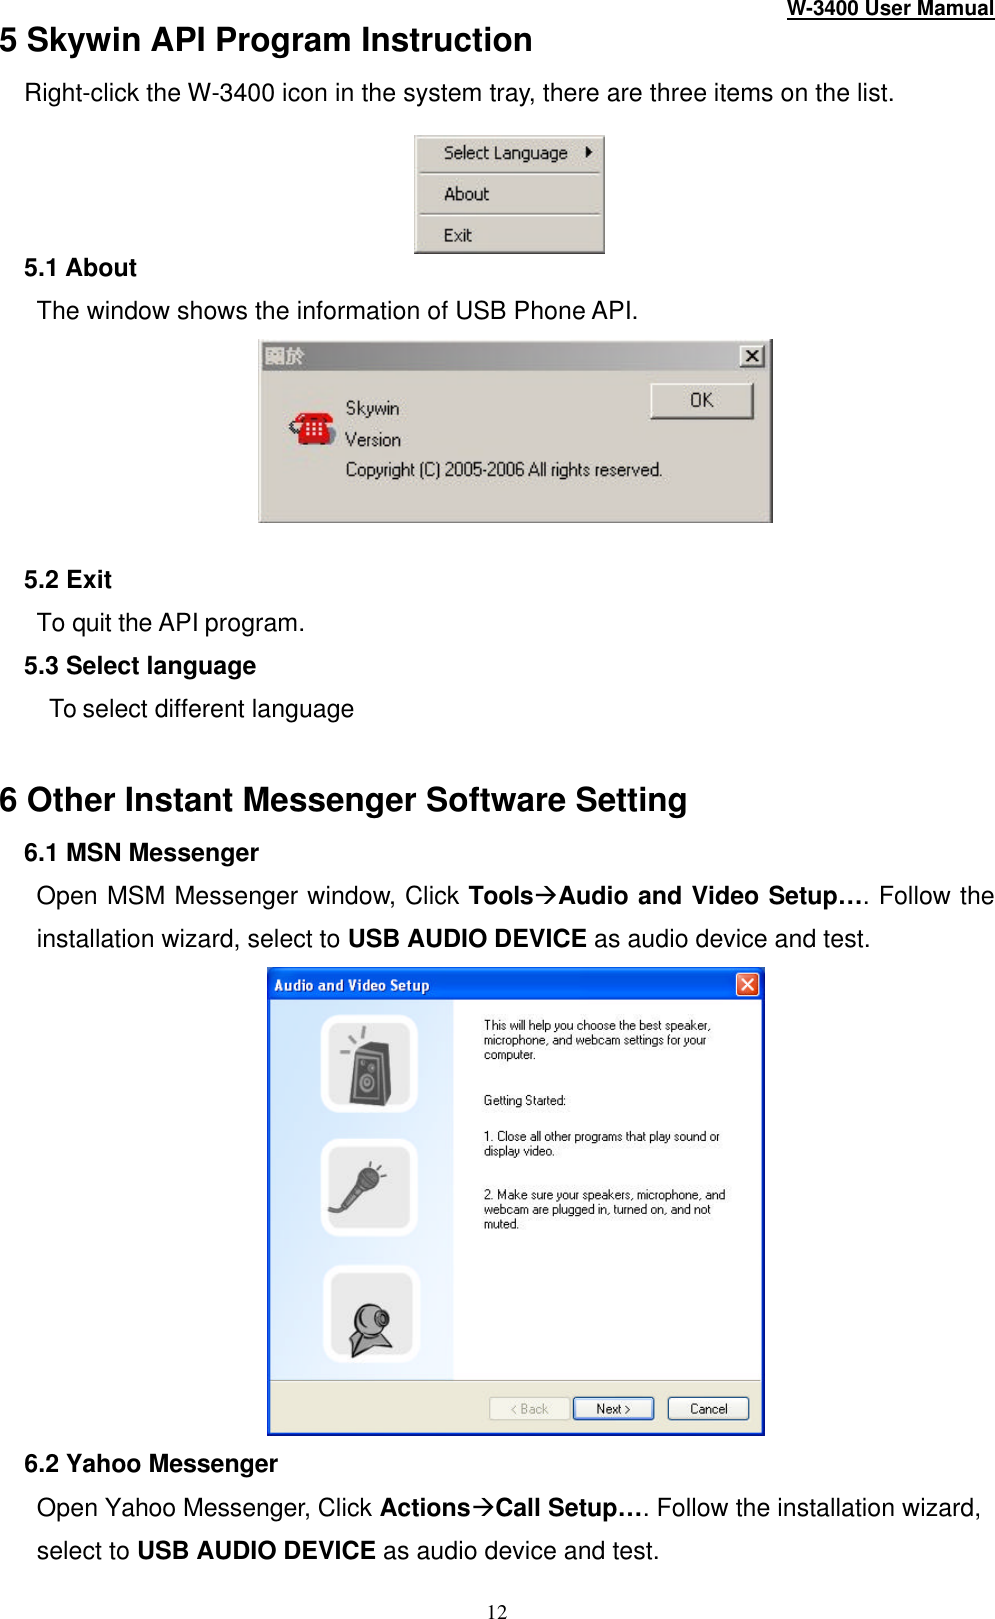 W-3400 User Mamual 12 5 Skywin API Program Instruction Right-click the W -3400 icon in the system tray, there are three items on the list.   5.1 About The window shows the information of USB Phone API.   5.2 Exit To quit the API program. 5.3 Select language    To select different language    6 Other Instant Messenger Software Setting 6.1 MSN Messenger Open MSM Messenger window, Click ToolsàAudio and Video Setup… . Follow the installation wizard, select to USB AUDIO DEVICE as audio device and test.  6.2 Yahoo Messenger Open Yahoo Messenger, Click ActionsàCall Setup… . Follow the installation wizard, select to USB AUDIO DEVICE as audio device and test. 